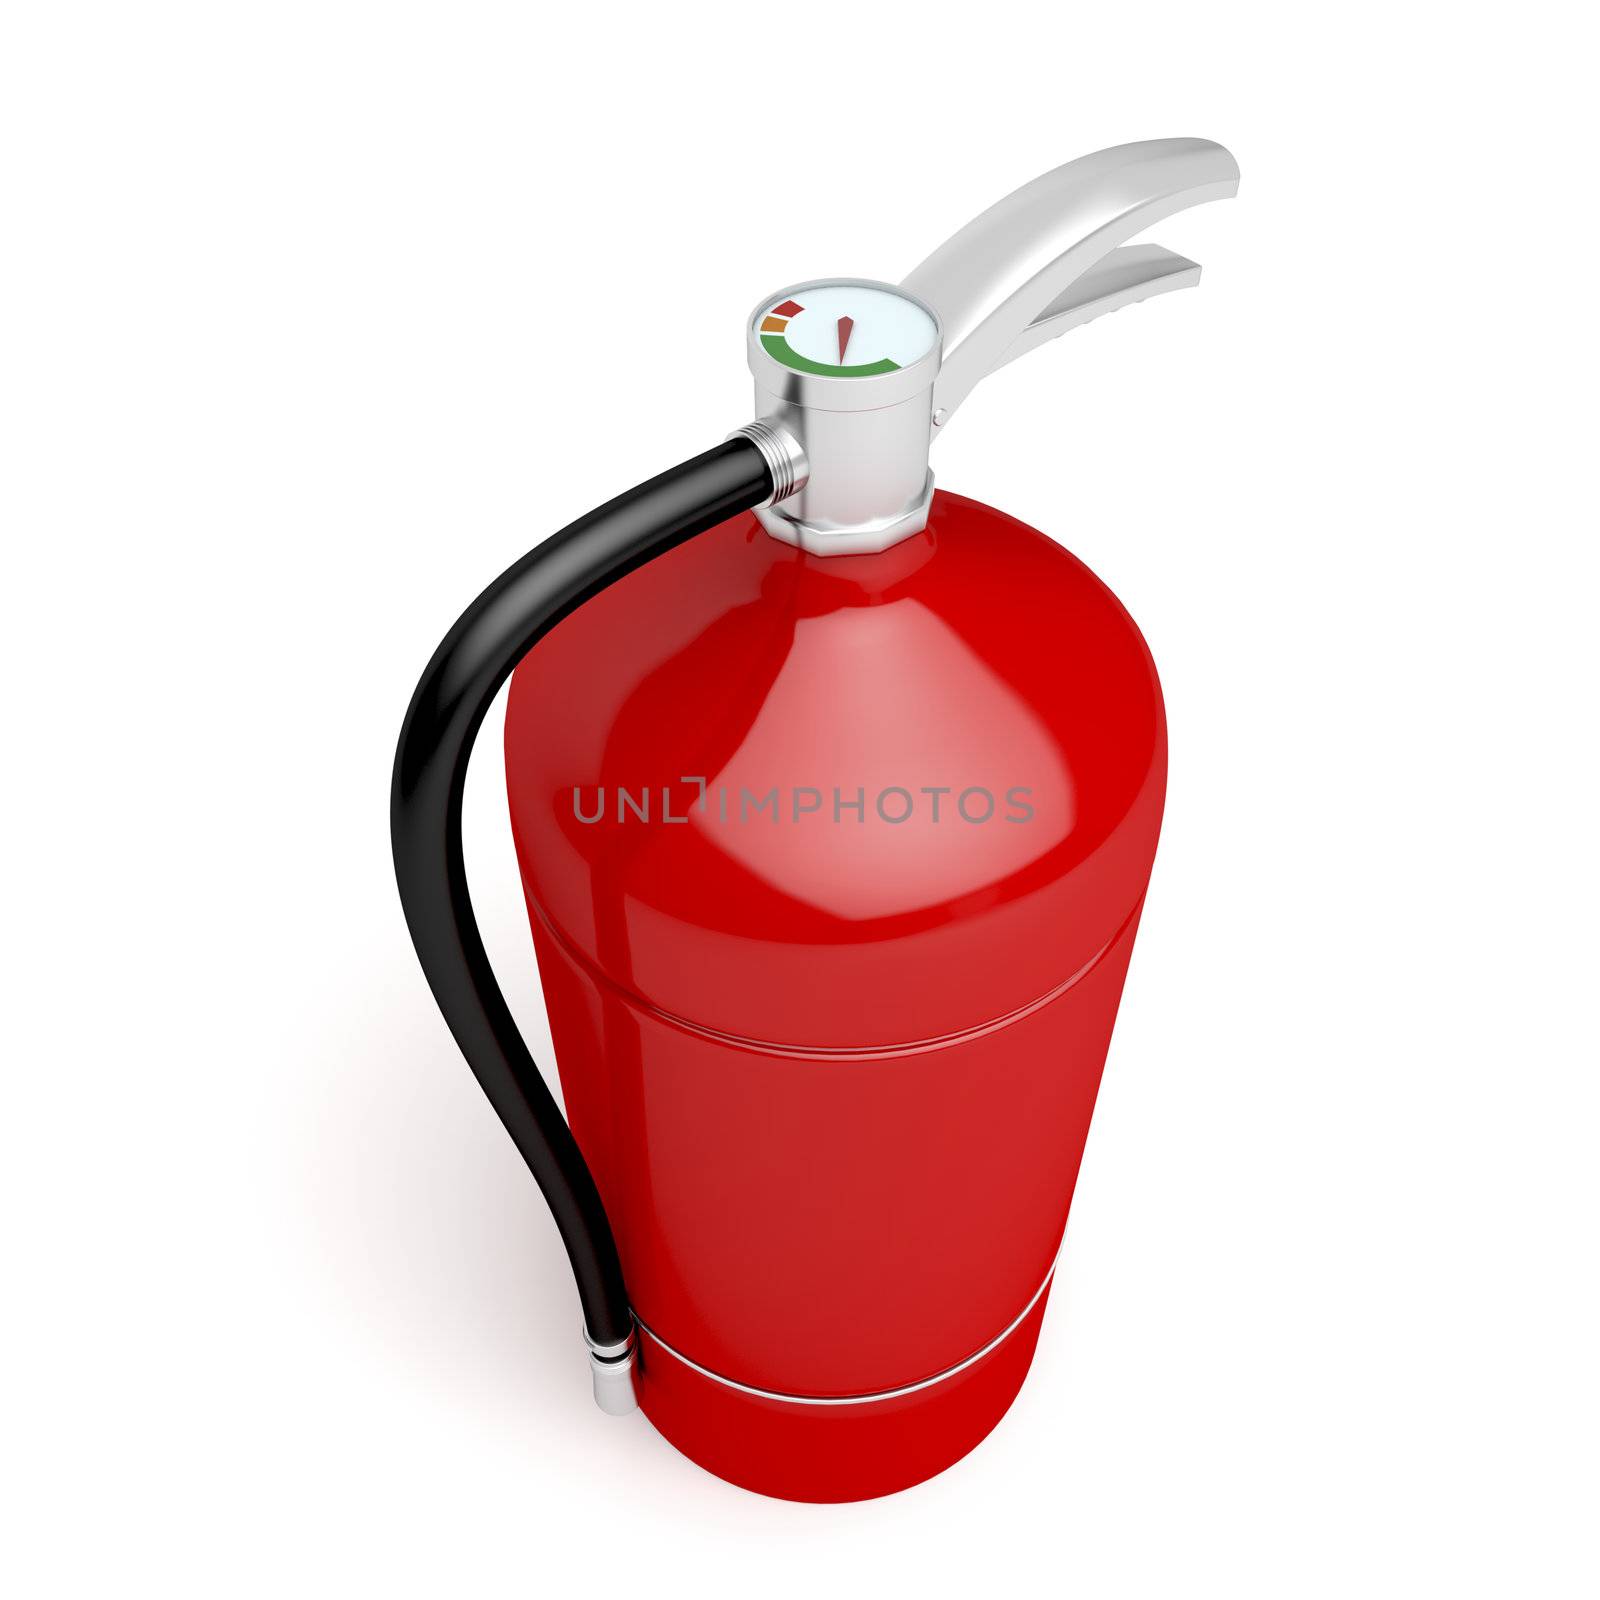 Fire extinguisher on white by magraphics